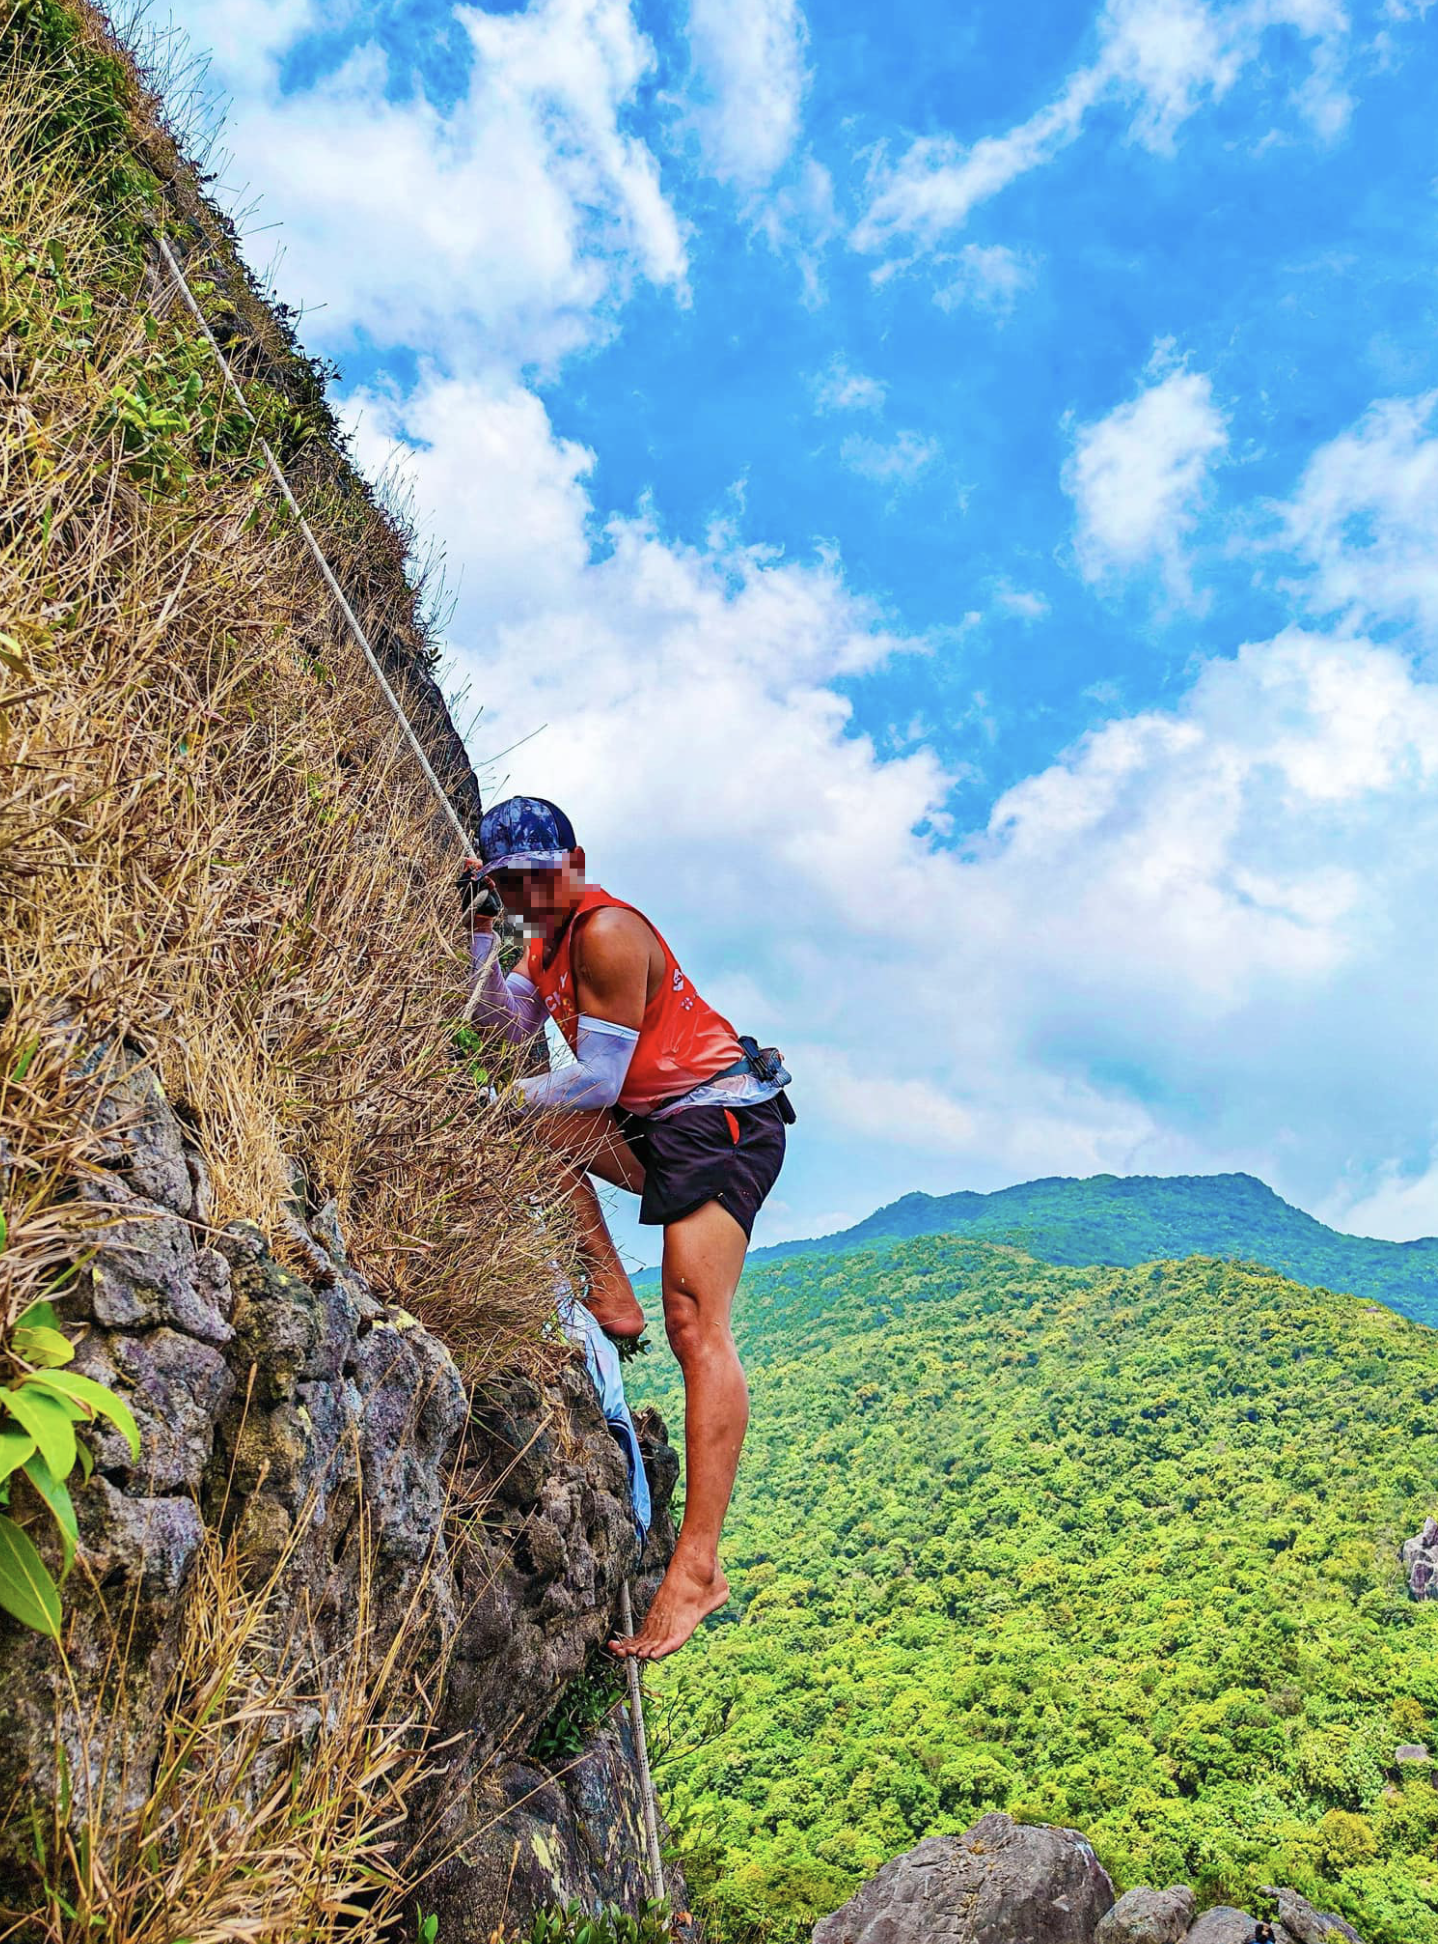 A man scales a vertical mountain without safety harnesses in Binh Dinh Province, south-central Vietnam. Photo: Facebook